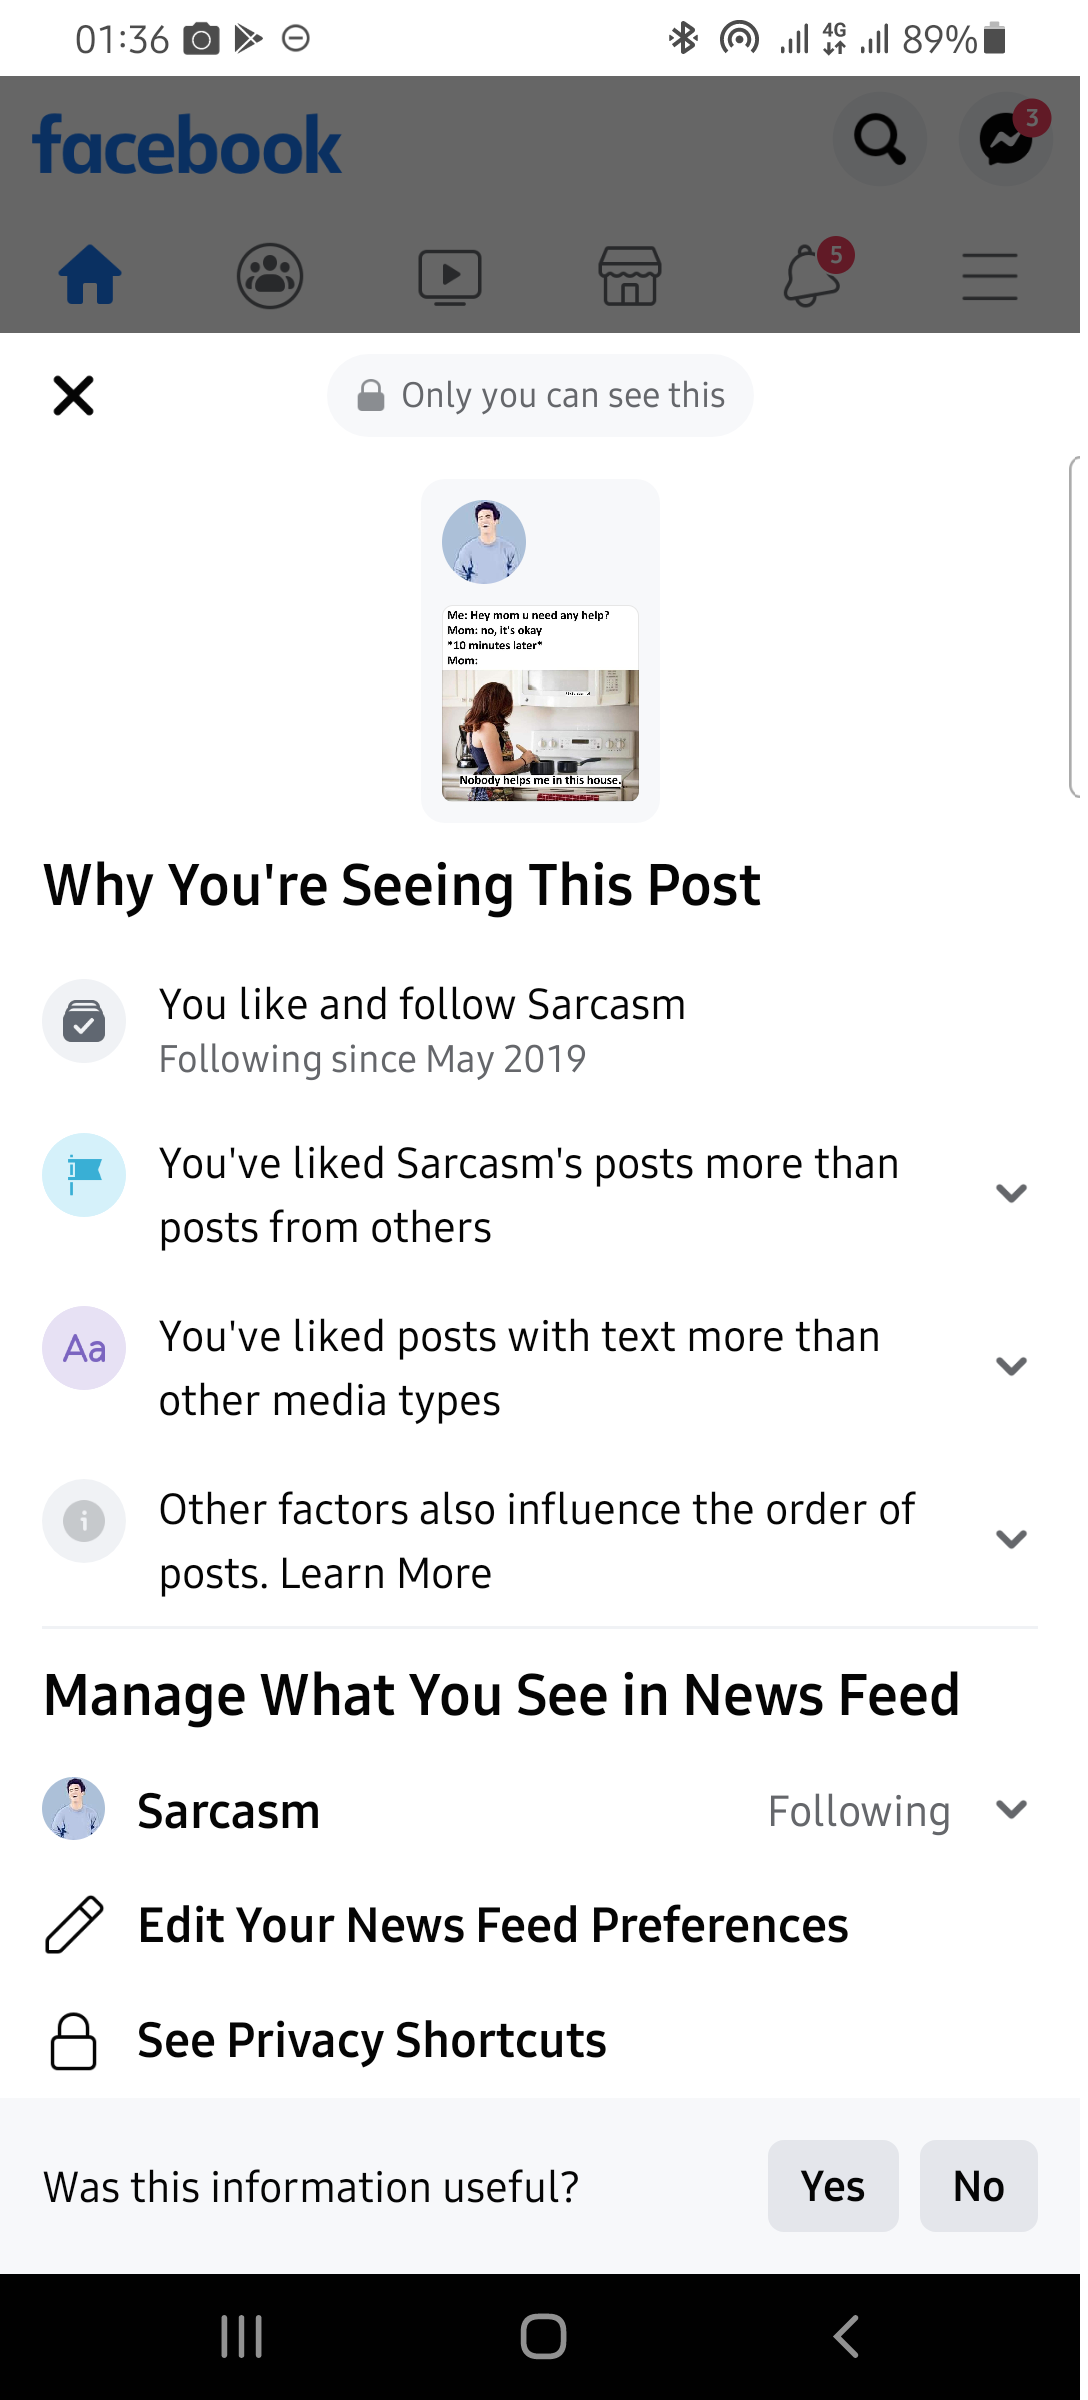 3-ways-facebook-is-giving-you-more-control-over-your-news-feed-in-2021